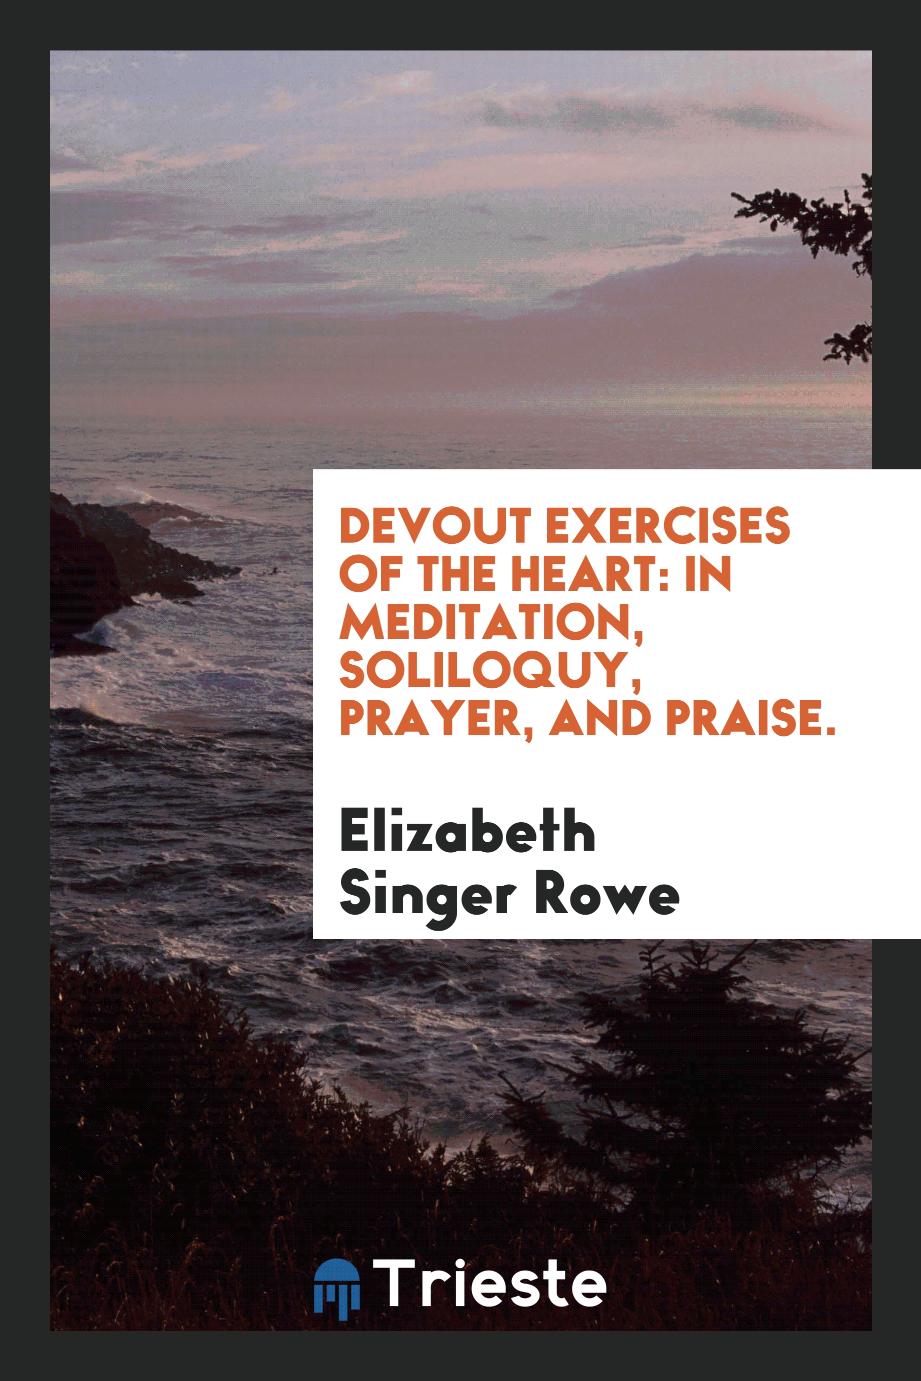 Devout exercises of the heart: in meditation, soliloquy, prayer, and praise.